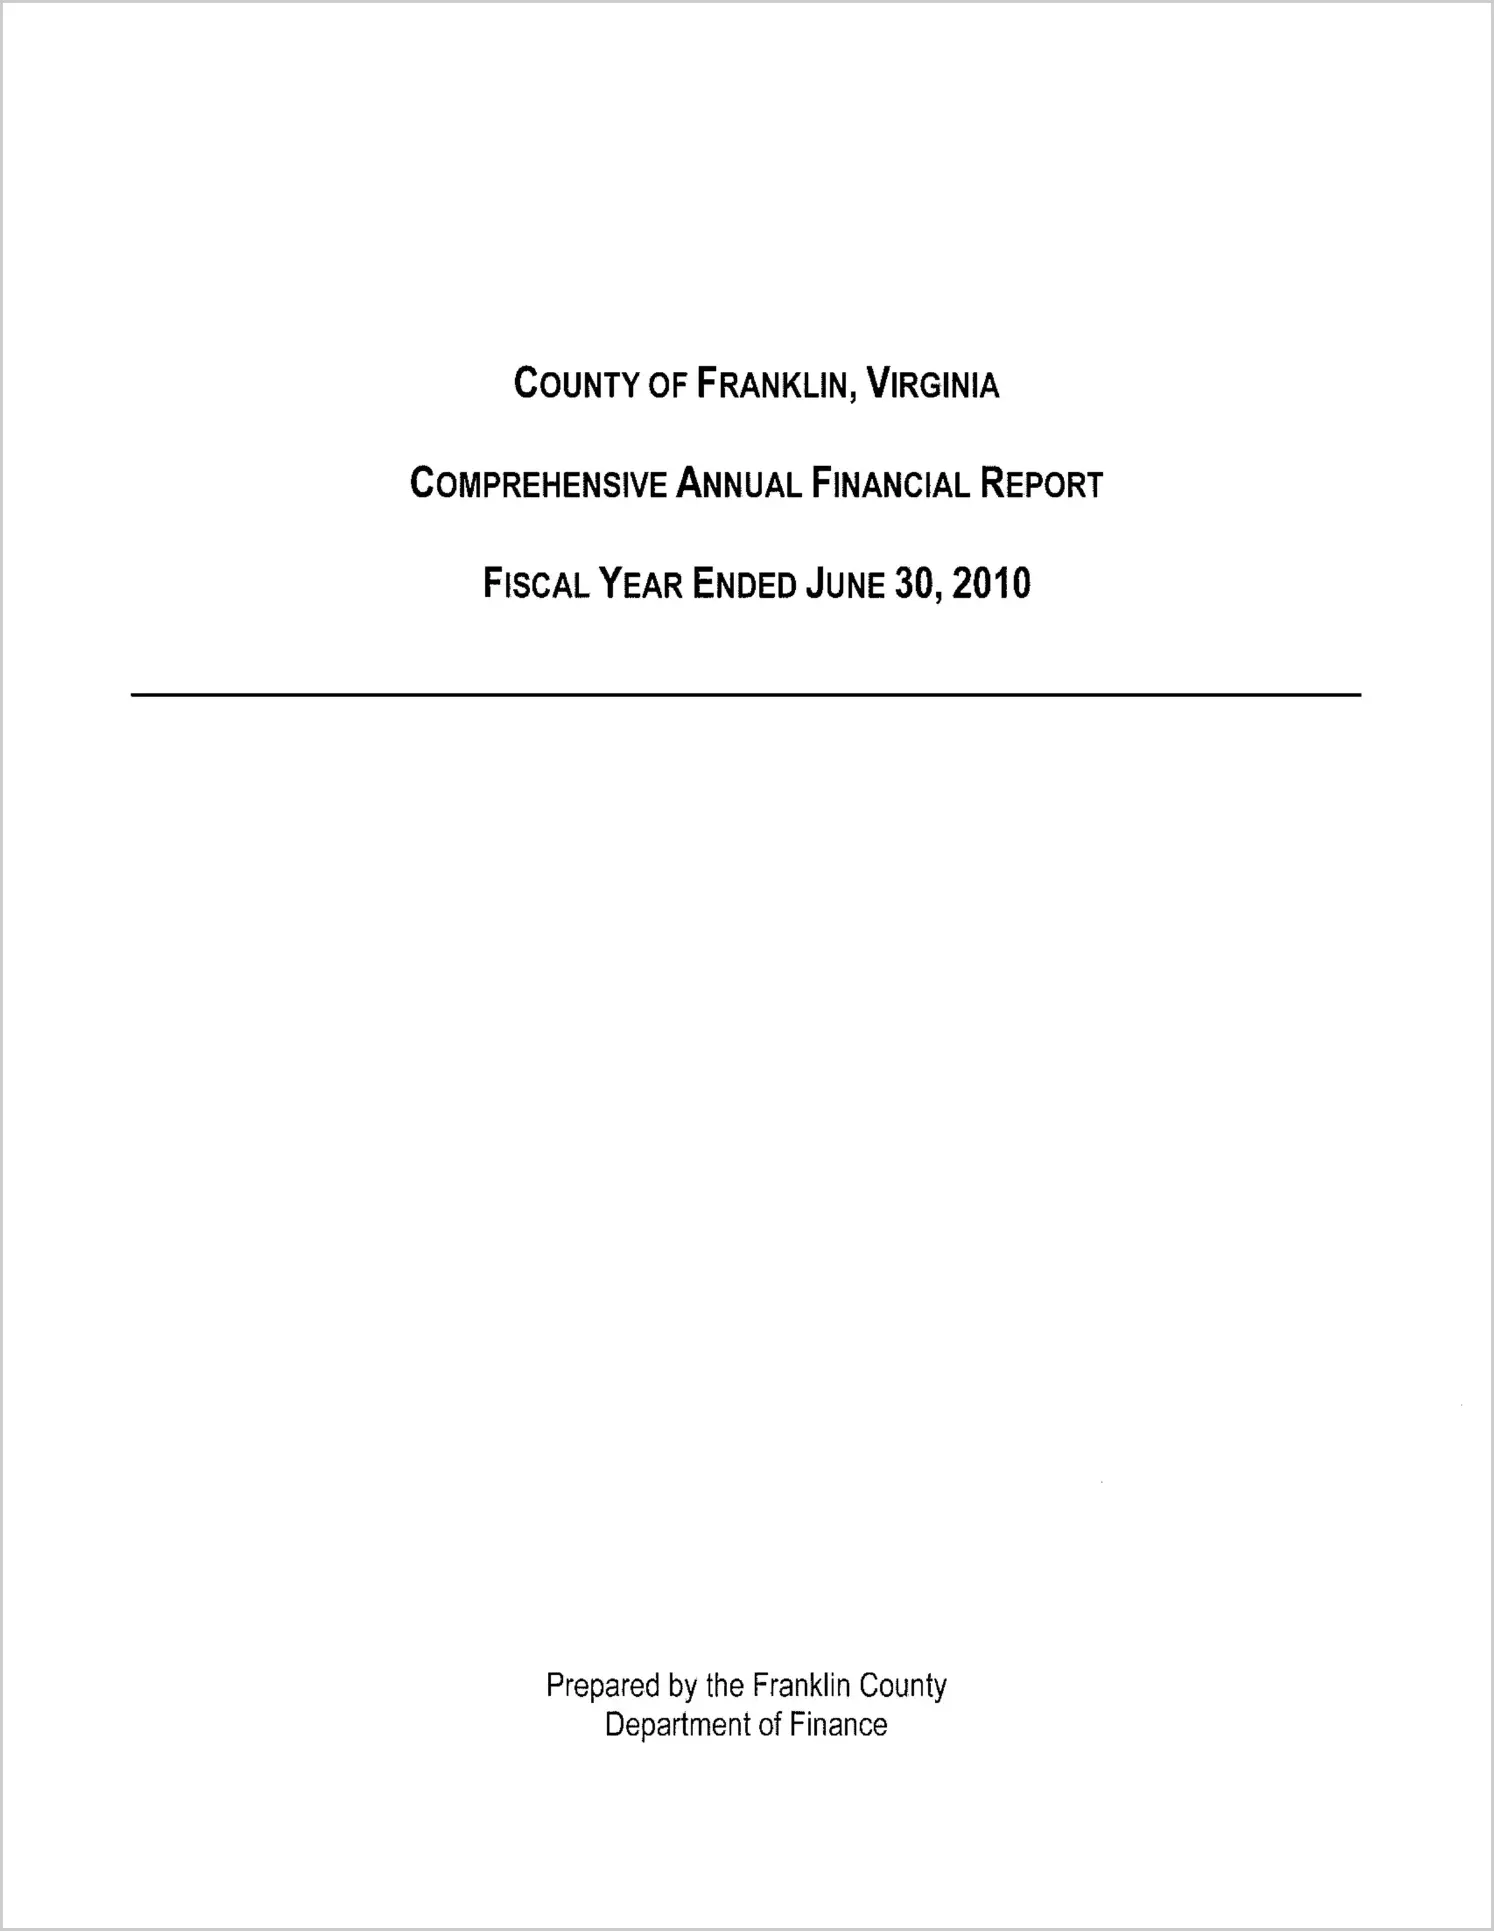 2010 Annual Financial Report for County of Franklin